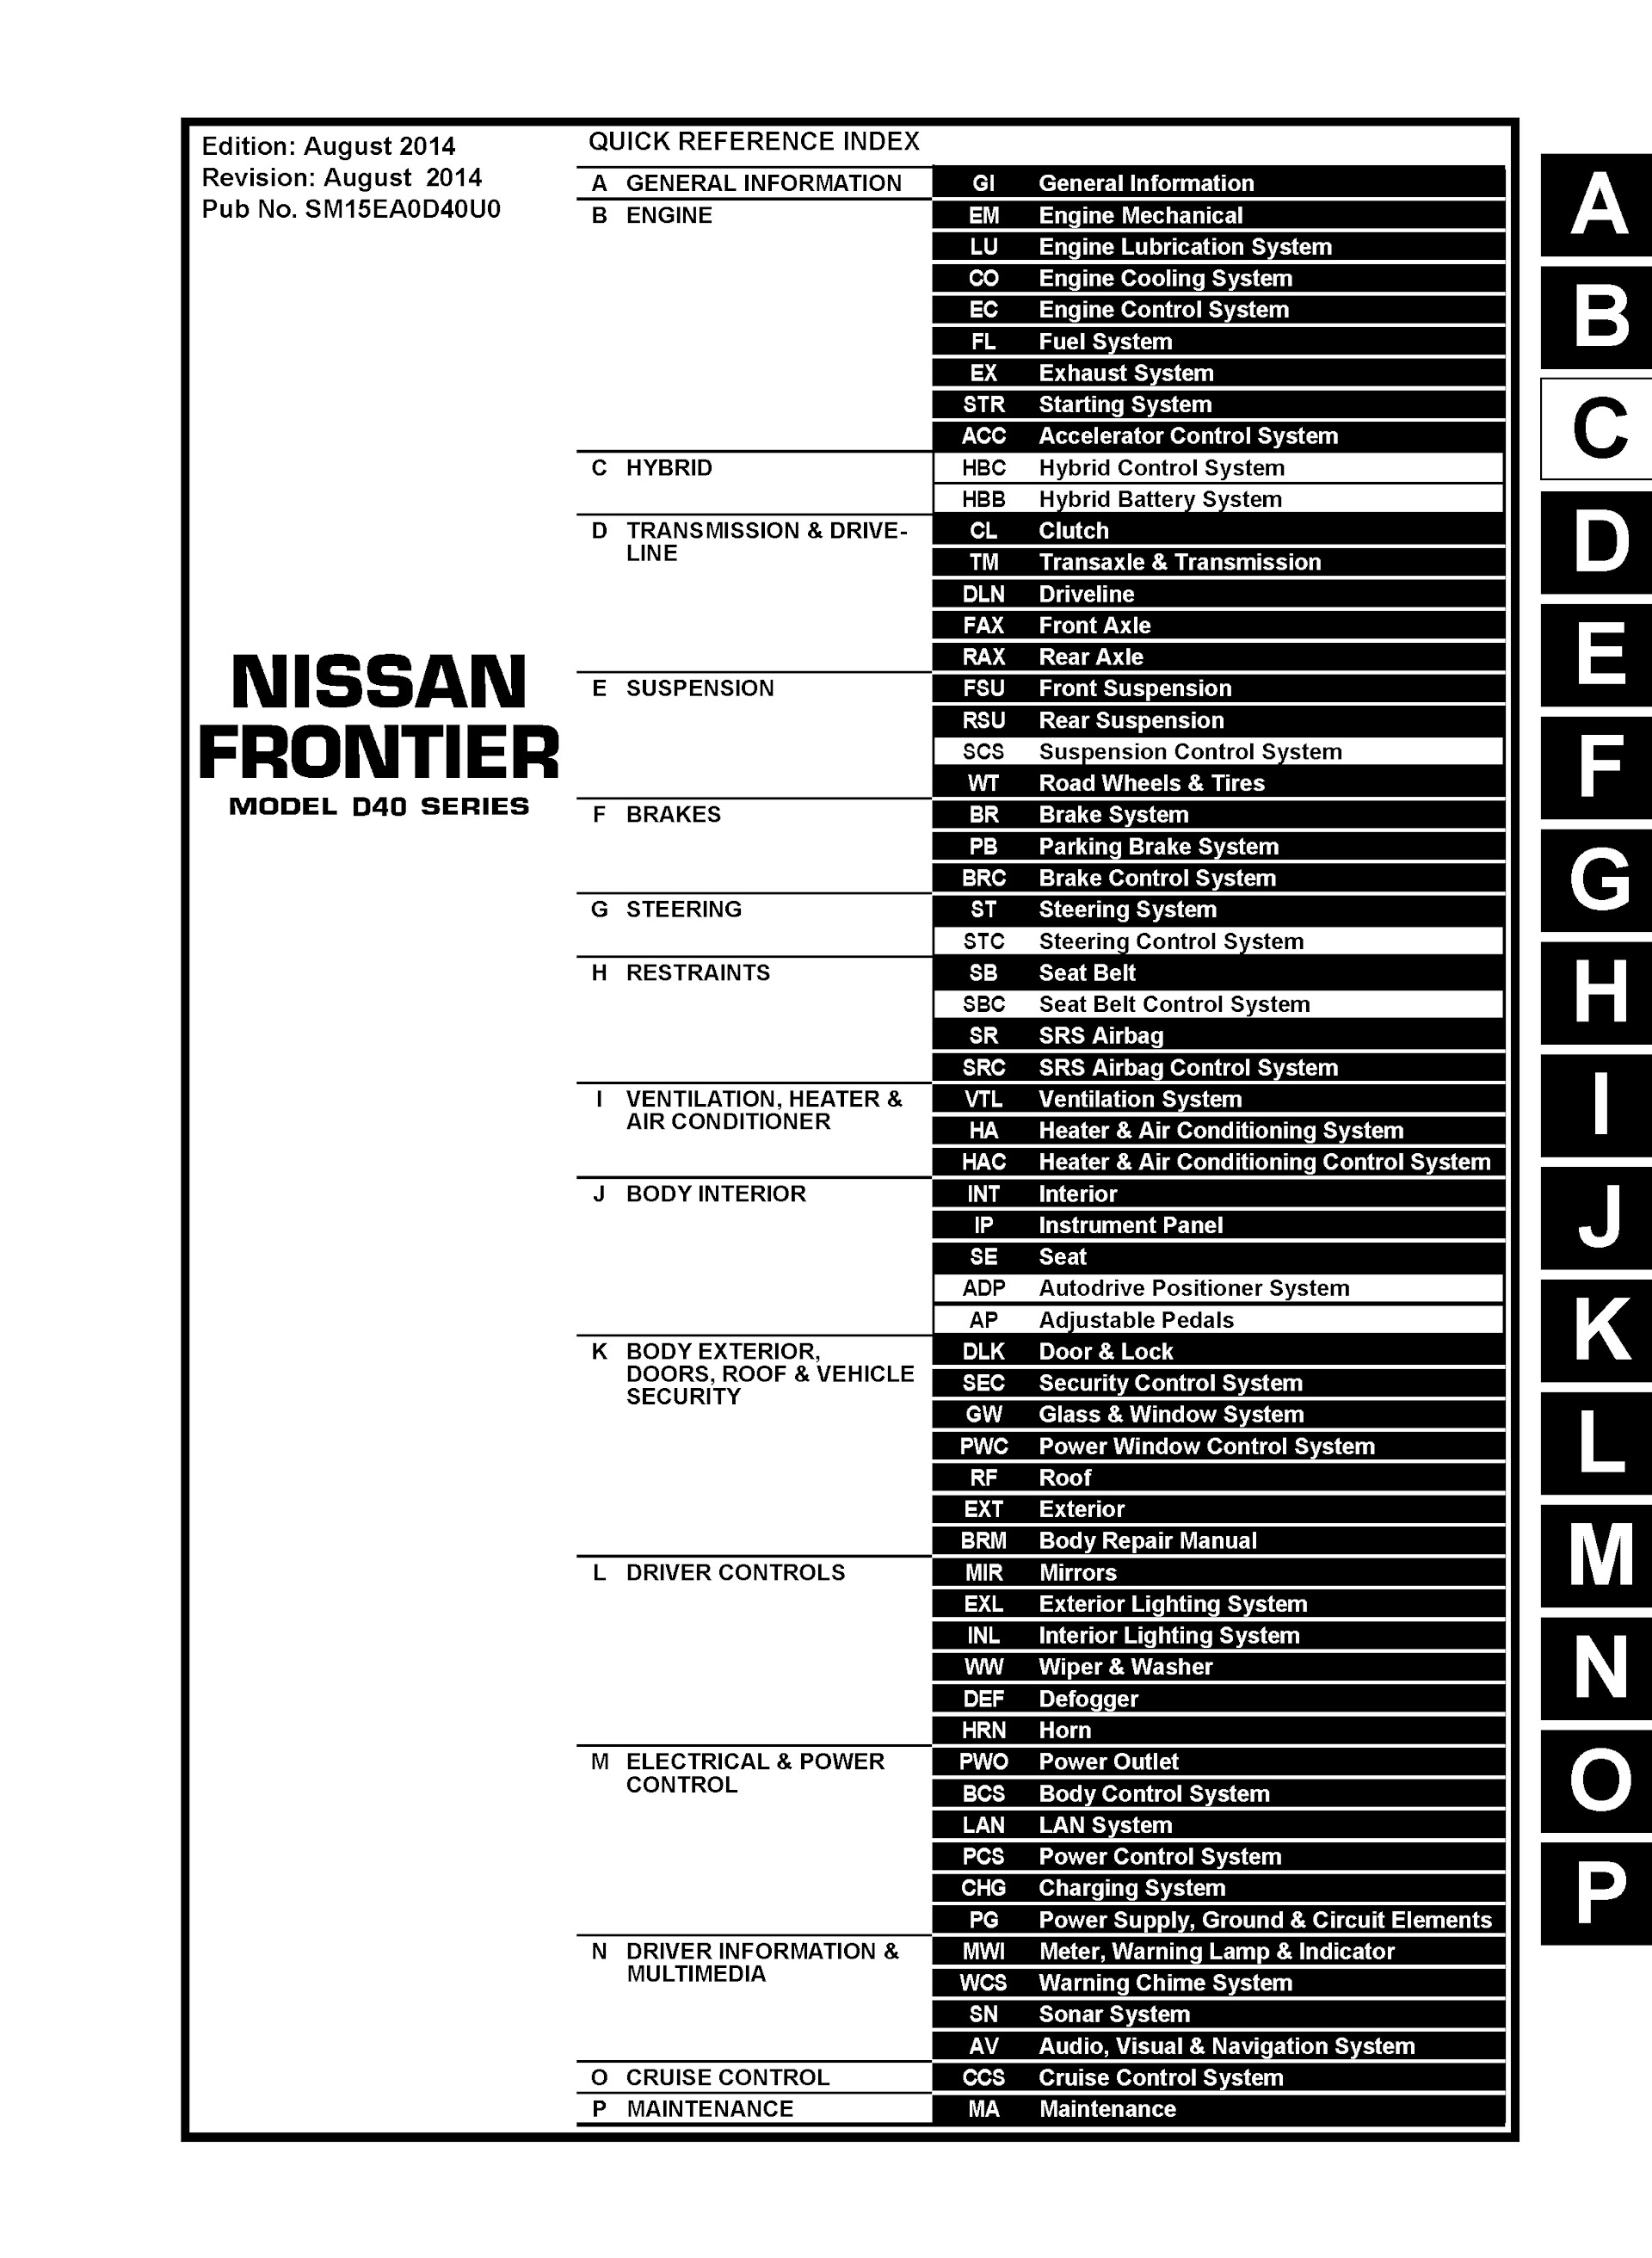 Table of Contents: 2015 Nissan Frontier Repair Manual